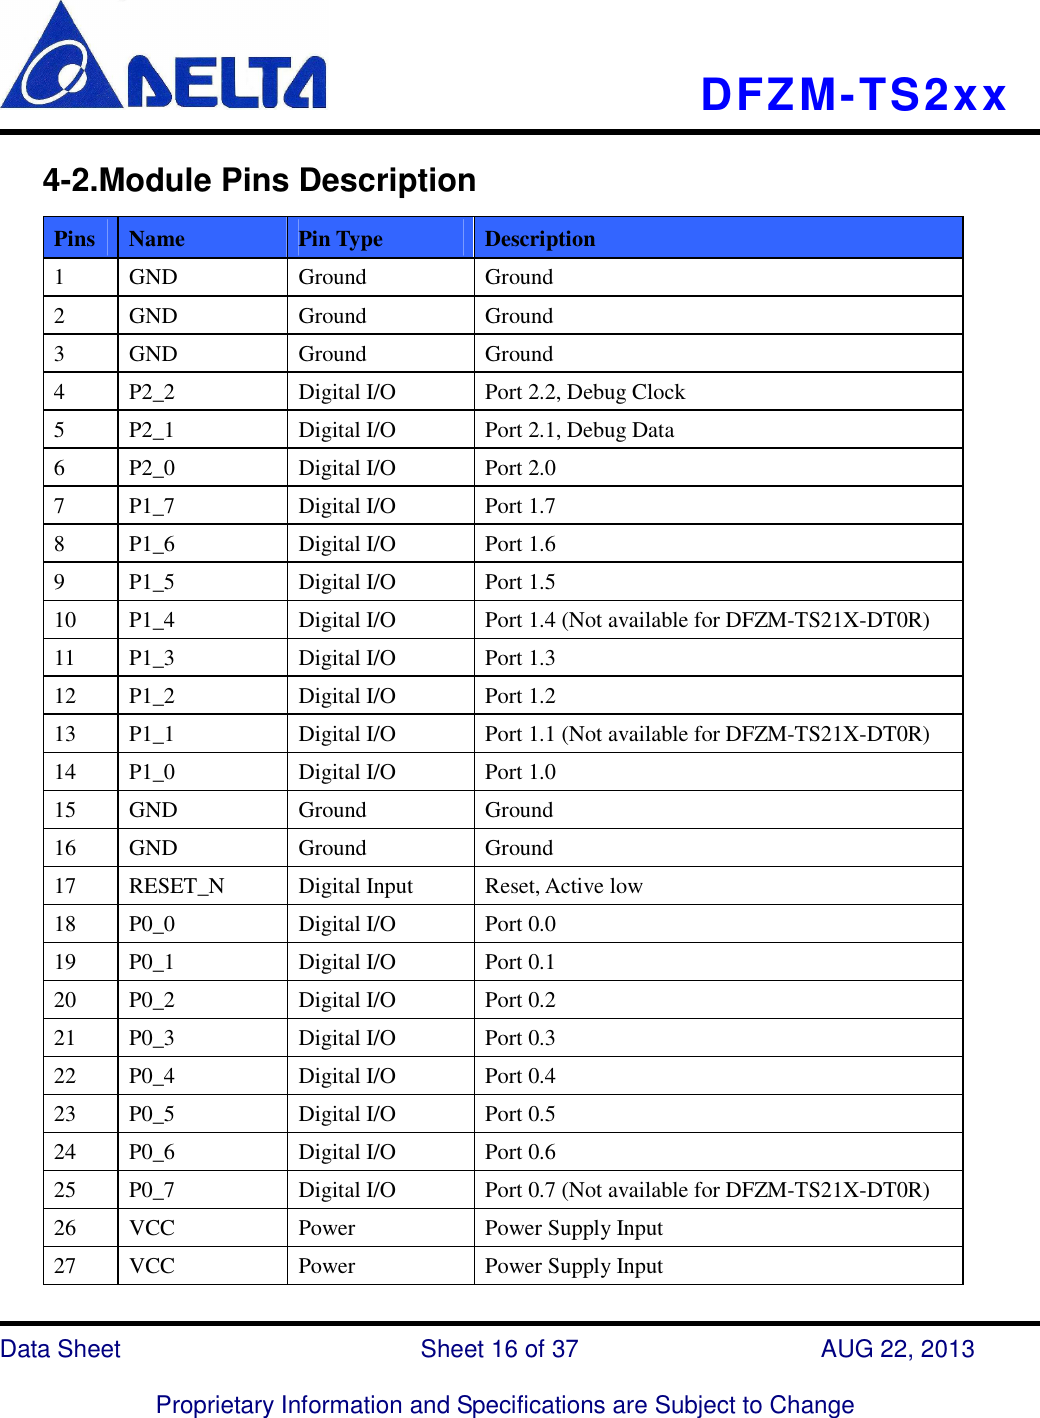    DFZM-TS2xx   Data Sheet                              Sheet 16 of 37                    AUG 22, 2013  Proprietary Information and Specifications are Subject to Change      4-2.Module Pins Description Pins  Name  Pin Type  Description 1  GND  Ground  Ground 2  GND  Ground  Ground 3  GND  Ground  Ground 4  P2_2  Digital I/O  Port 2.2, Debug Clock 5  P2_1  Digital I/O  Port 2.1, Debug Data 6  P2_0  Digital I/O  Port 2.0 7  P1_7  Digital I/O  Port 1.7 8  P1_6  Digital I/O  Port 1.6 9  P1_5  Digital I/O  Port 1.5 10  P1_4  Digital I/O  Port 1.4 (Not available for DFZM-TS21X-DT0R) 11  P1_3  Digital I/O  Port 1.3 12  P1_2  Digital I/O  Port 1.2 13  P1_1  Digital I/O  Port 1.1 (Not available for DFZM-TS21X-DT0R) 14  P1_0  Digital I/O  Port 1.0 15  GND  Ground  Ground 16  GND  Ground  Ground 17  RESET_N  Digital Input  Reset, Active low 18  P0_0  Digital I/O  Port 0.0 19  P0_1  Digital I/O  Port 0.1 20  P0_2  Digital I/O  Port 0.2 21  P0_3  Digital I/O  Port 0.3 22  P0_4  Digital I/O  Port 0.4 23  P0_5  Digital I/O  Port 0.5 24  P0_6  Digital I/O  Port 0.6 25  P0_7  Digital I/O  Port 0.7 (Not available for DFZM-TS21X-DT0R) 26  VCC  Power  Power Supply Input 27  VCC  Power  Power Supply Input 